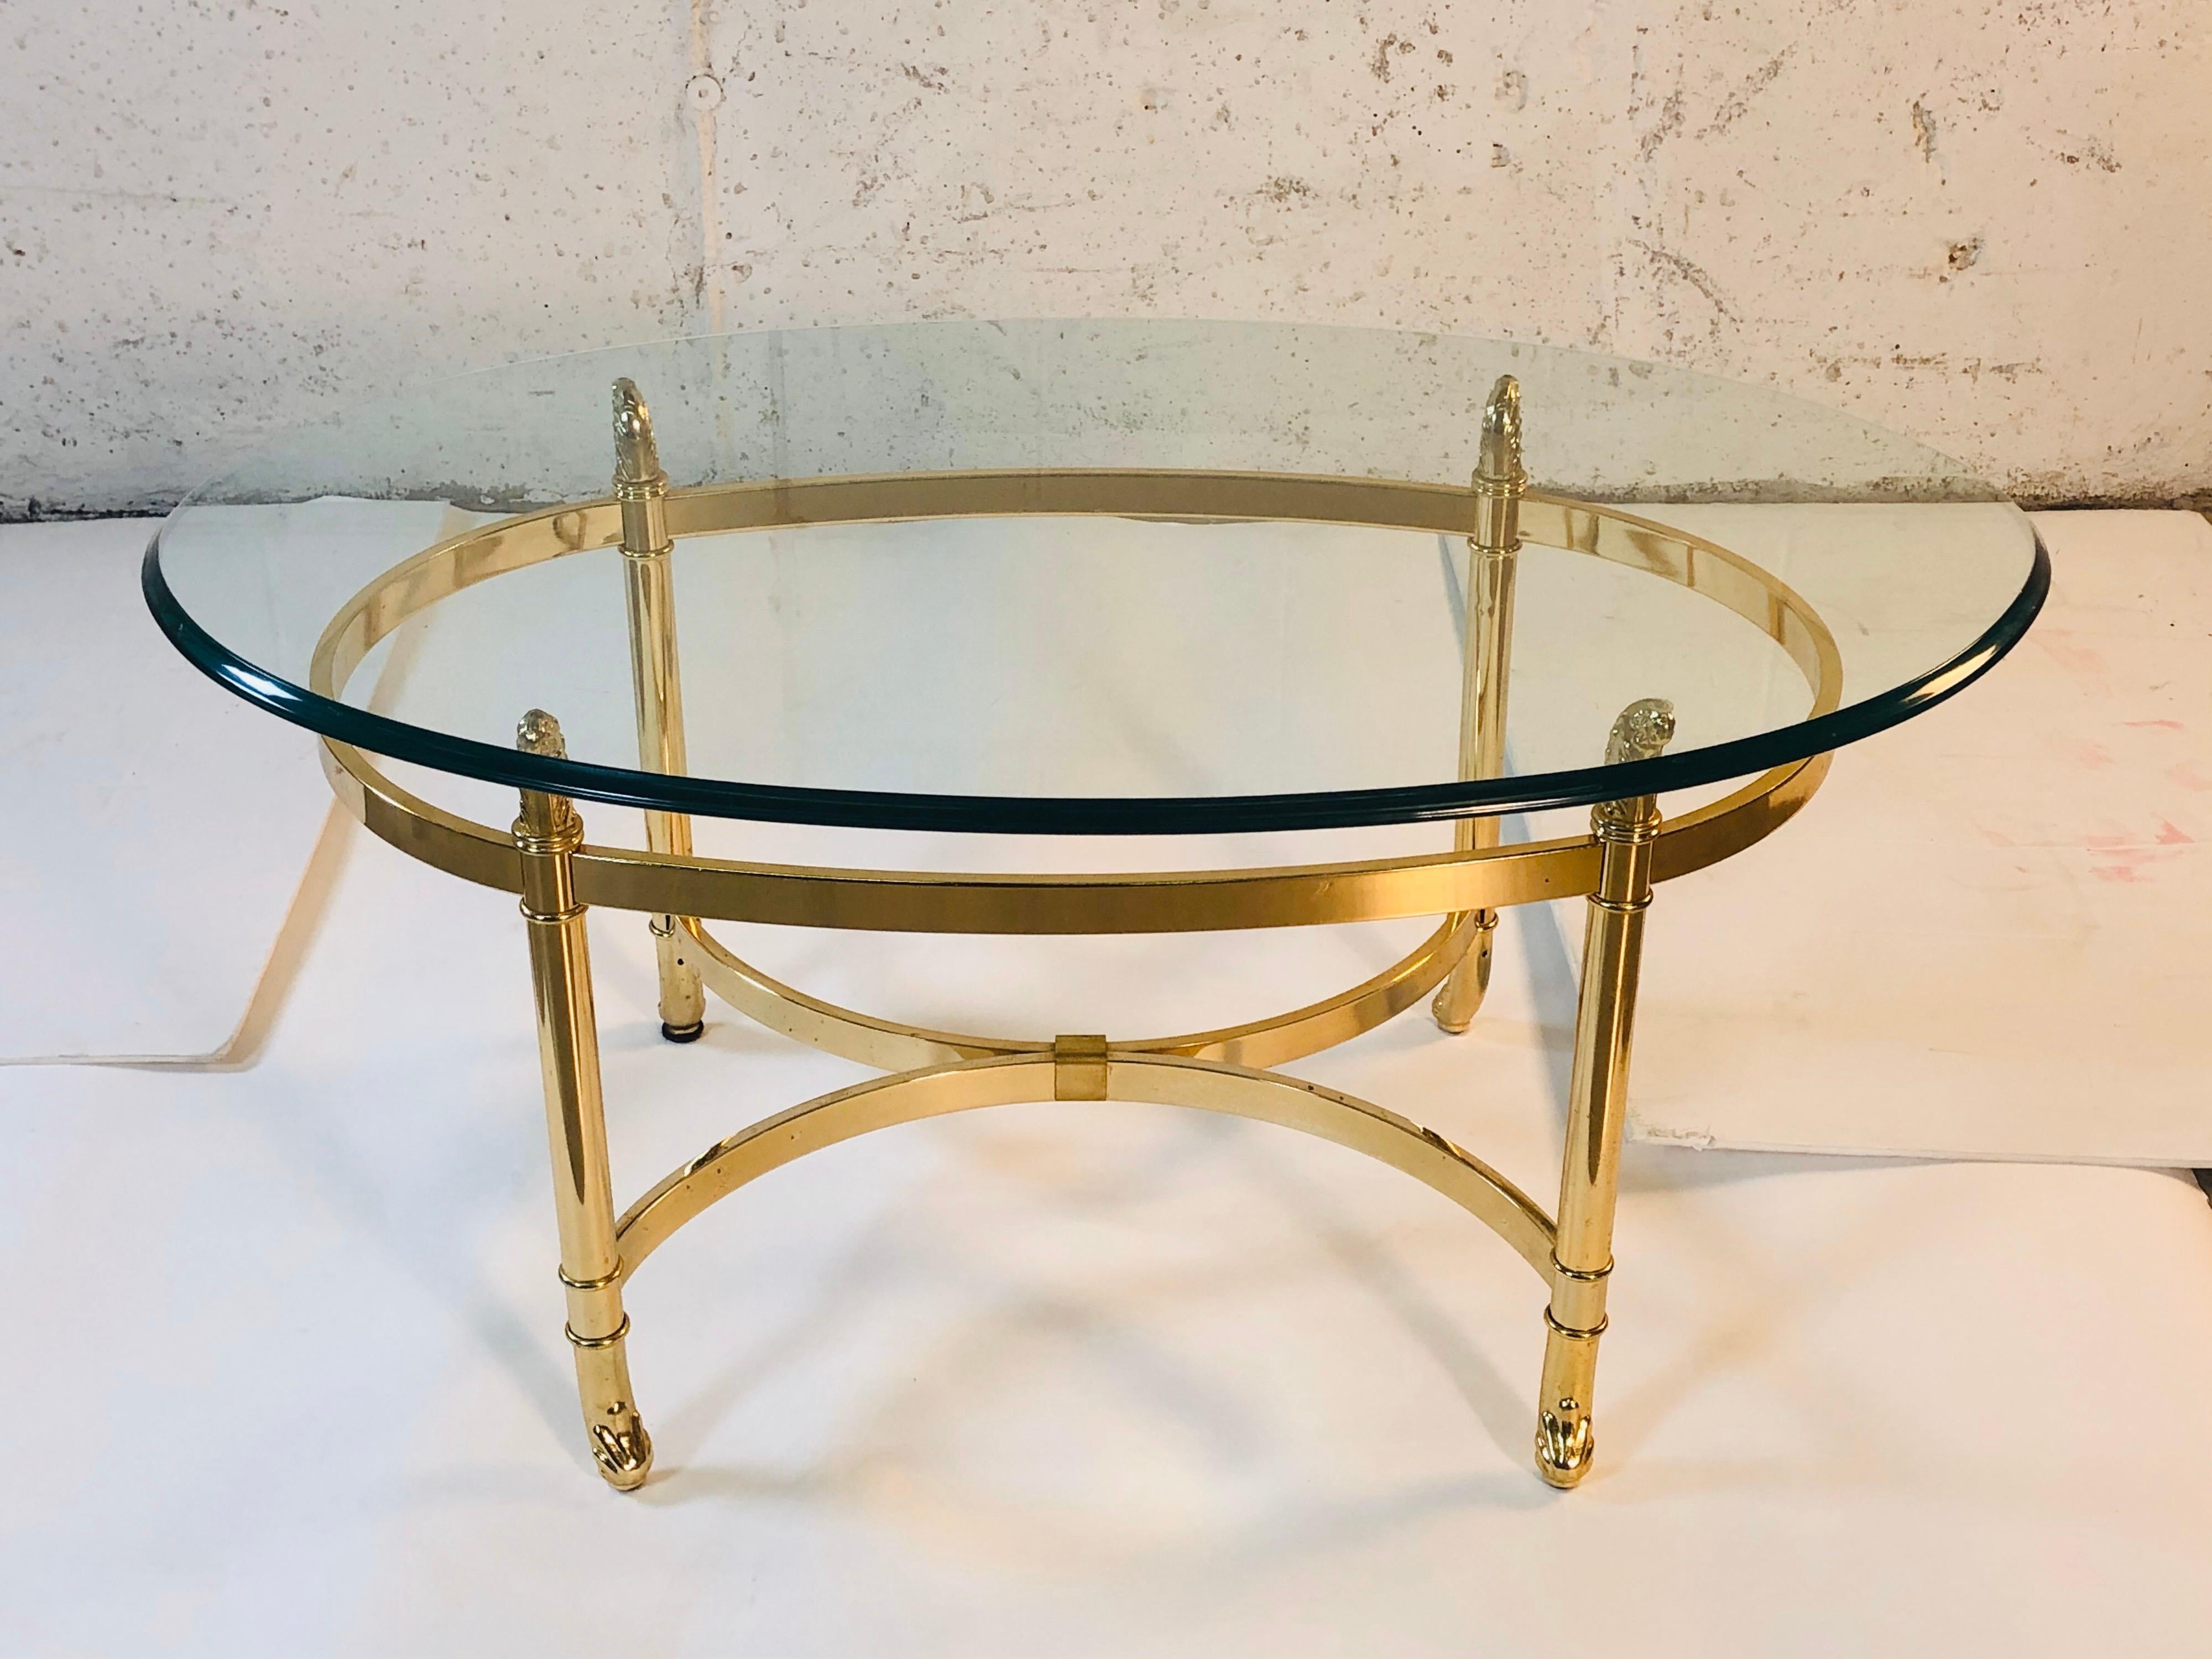 Vintage 1960s small LaBarge style oval brass base and glass top coffee table. The table has scroll accents on the feet and holding the glass. The glass top has a nice deep bevel. Light tarnish and pitting from age. Glass has a couple of light